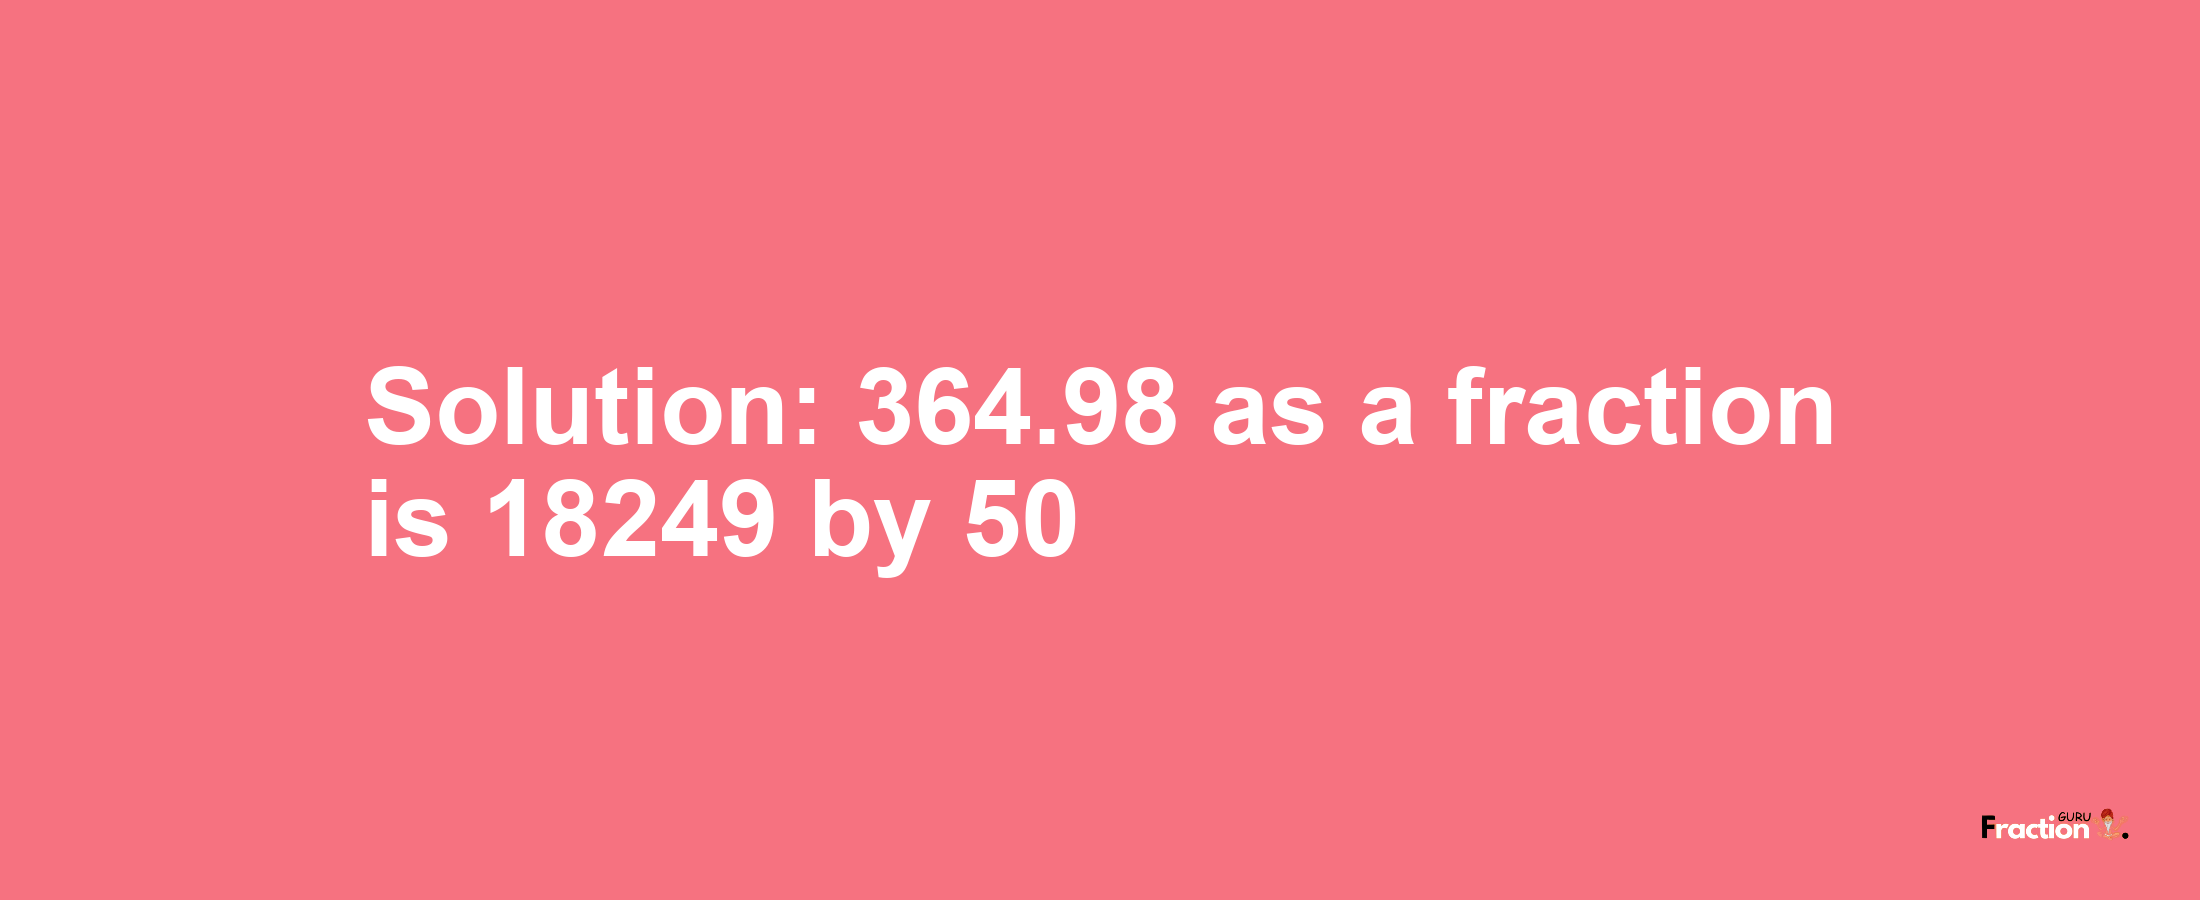 Solution:364.98 as a fraction is 18249/50